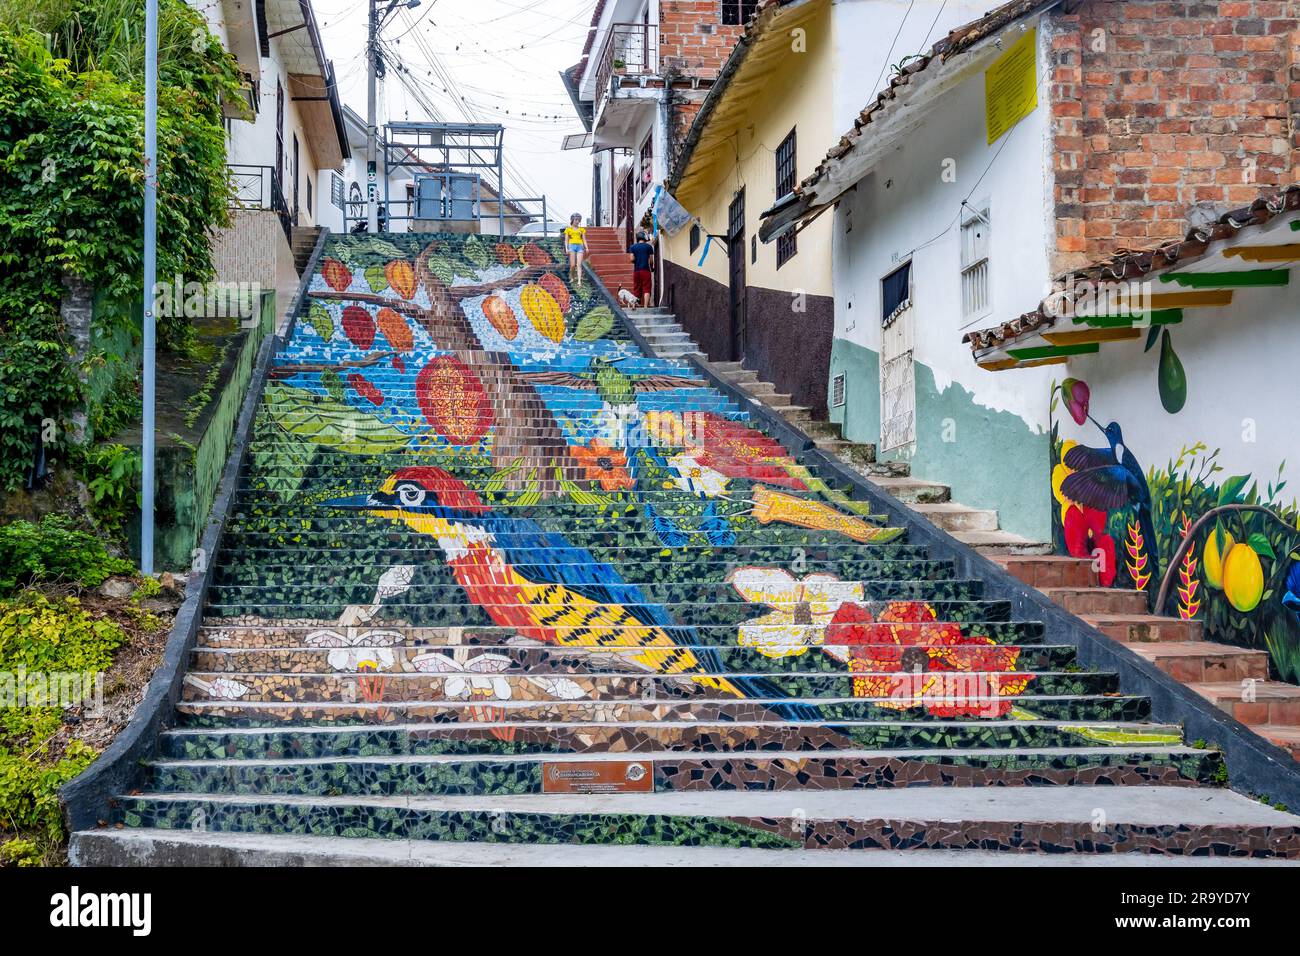 Colorful mosaic on the steps of San Vincente de Chucuri, depicting rich fauna and flora of the Andes mountains. Colombia, South America. Stock Photo